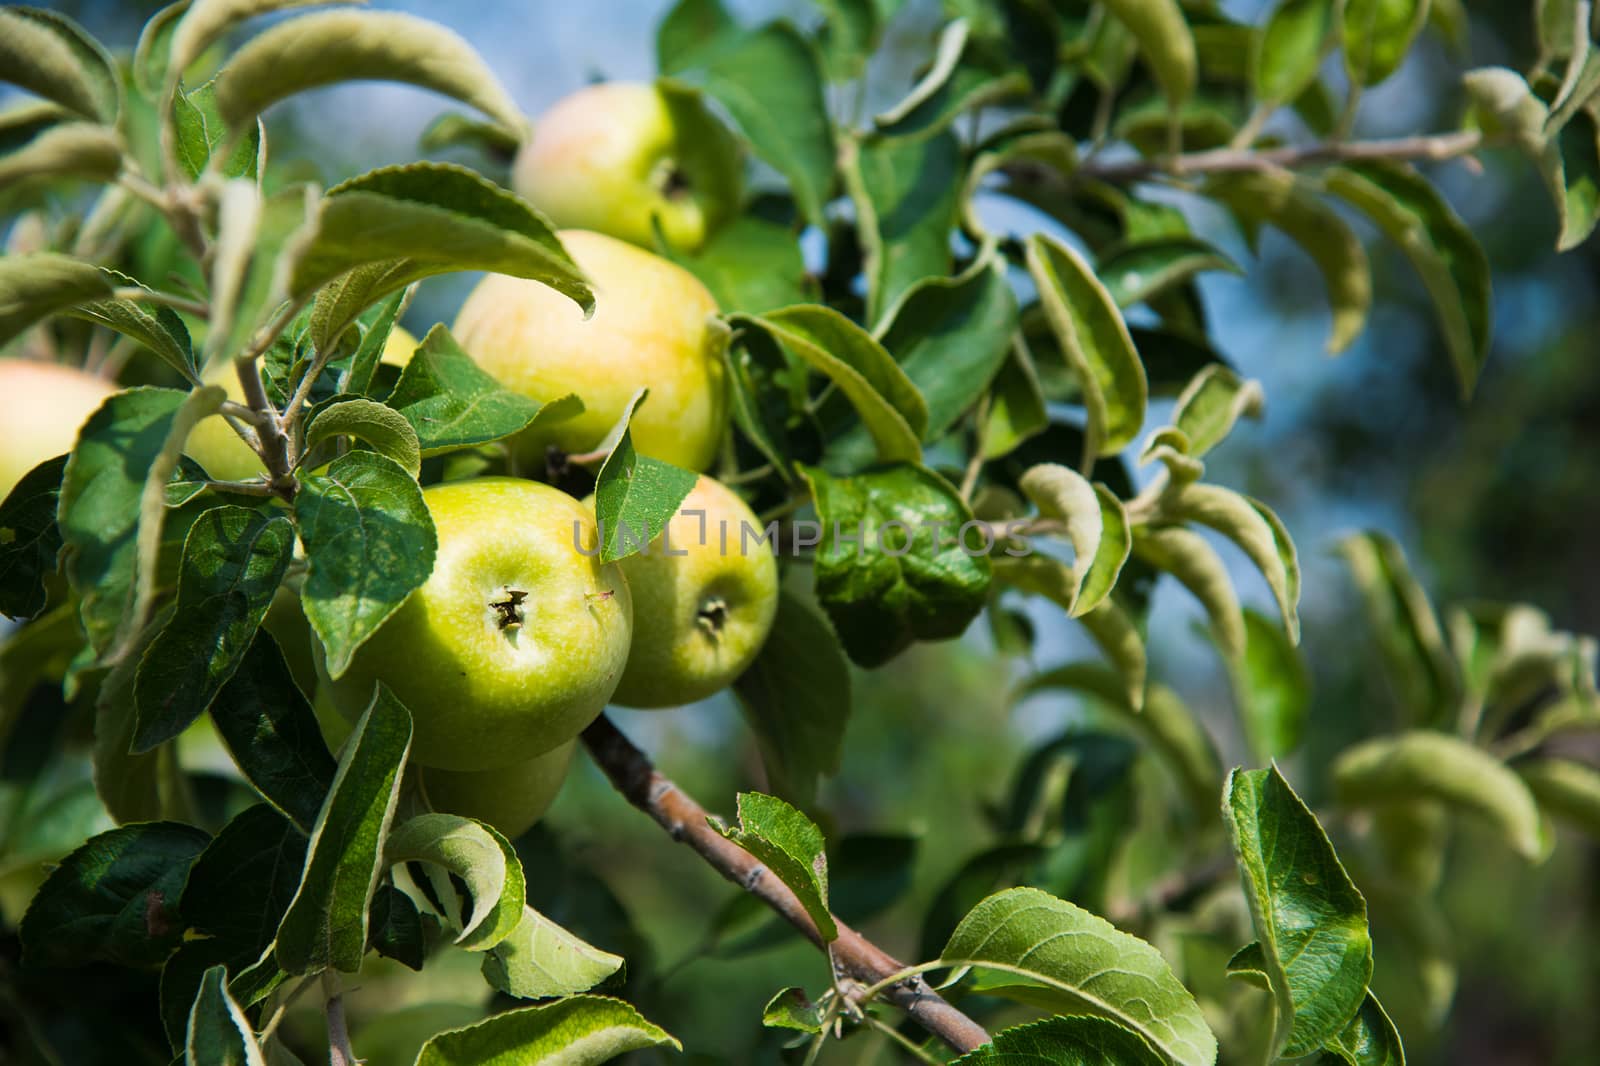 Apples grows on a branch among the green foliage. Apple orchard